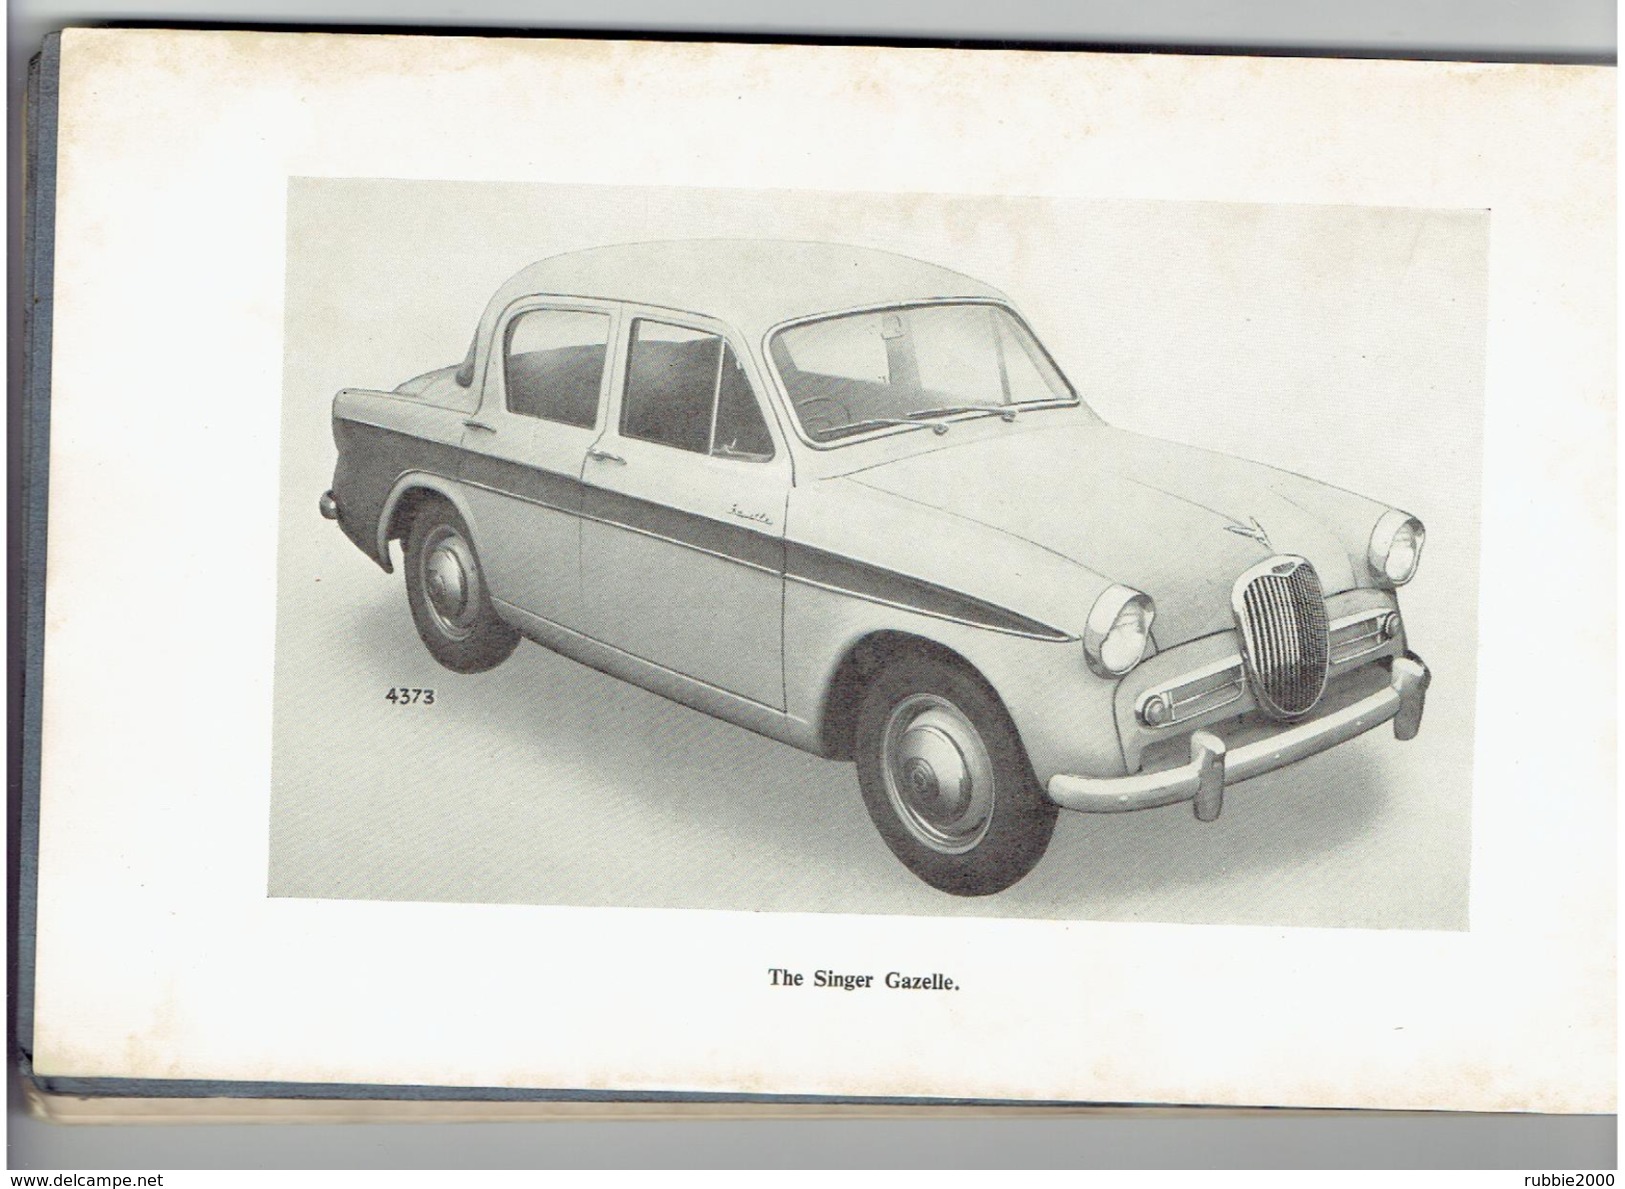 THE SINGER GAZELLE OWNERS HANDBOOK ISSUED 1958 SINGER MOTORS LIMITED COVENTRY ENGLAND A ROOTES PRODUCT - Verkehr